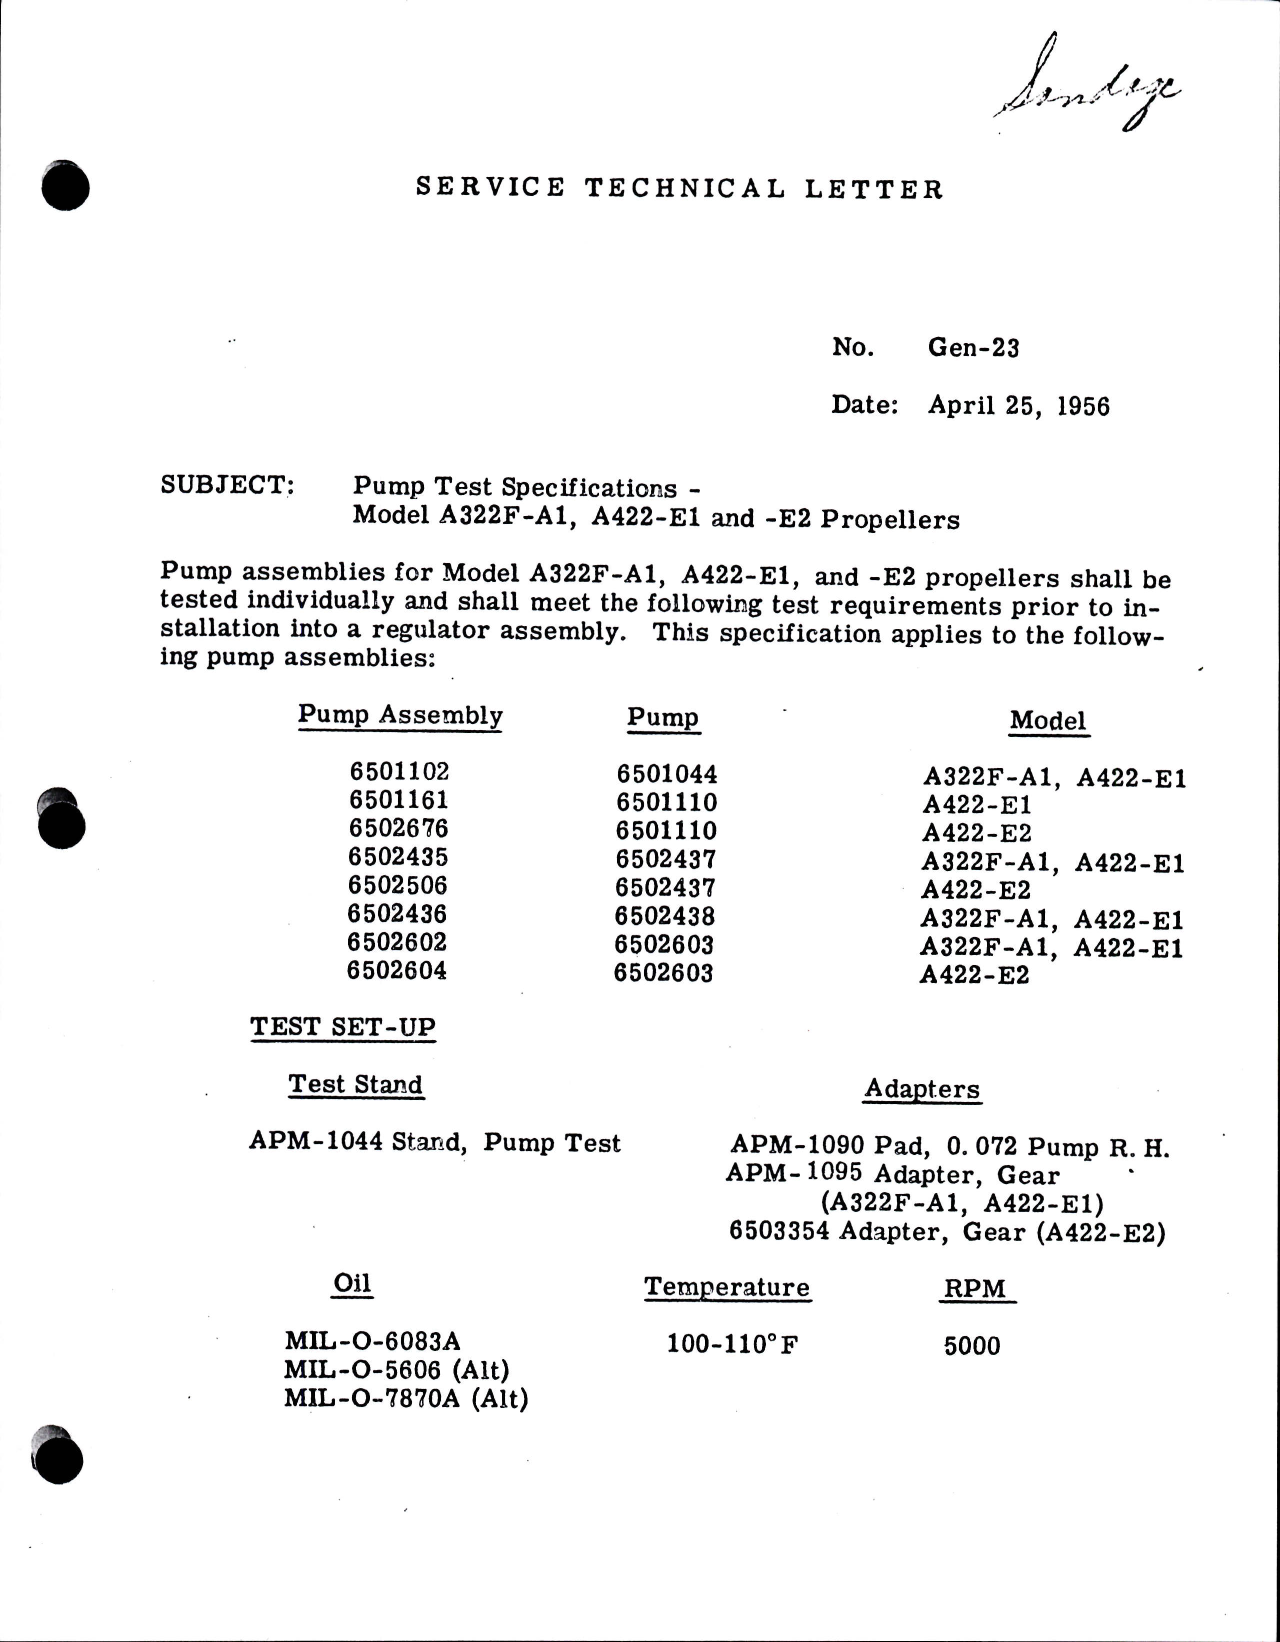 Sample page 1 from AirCorps Library document: Pump Test Specifications for Model A322F-A1, A422-E1 and A422-E2 Propellers